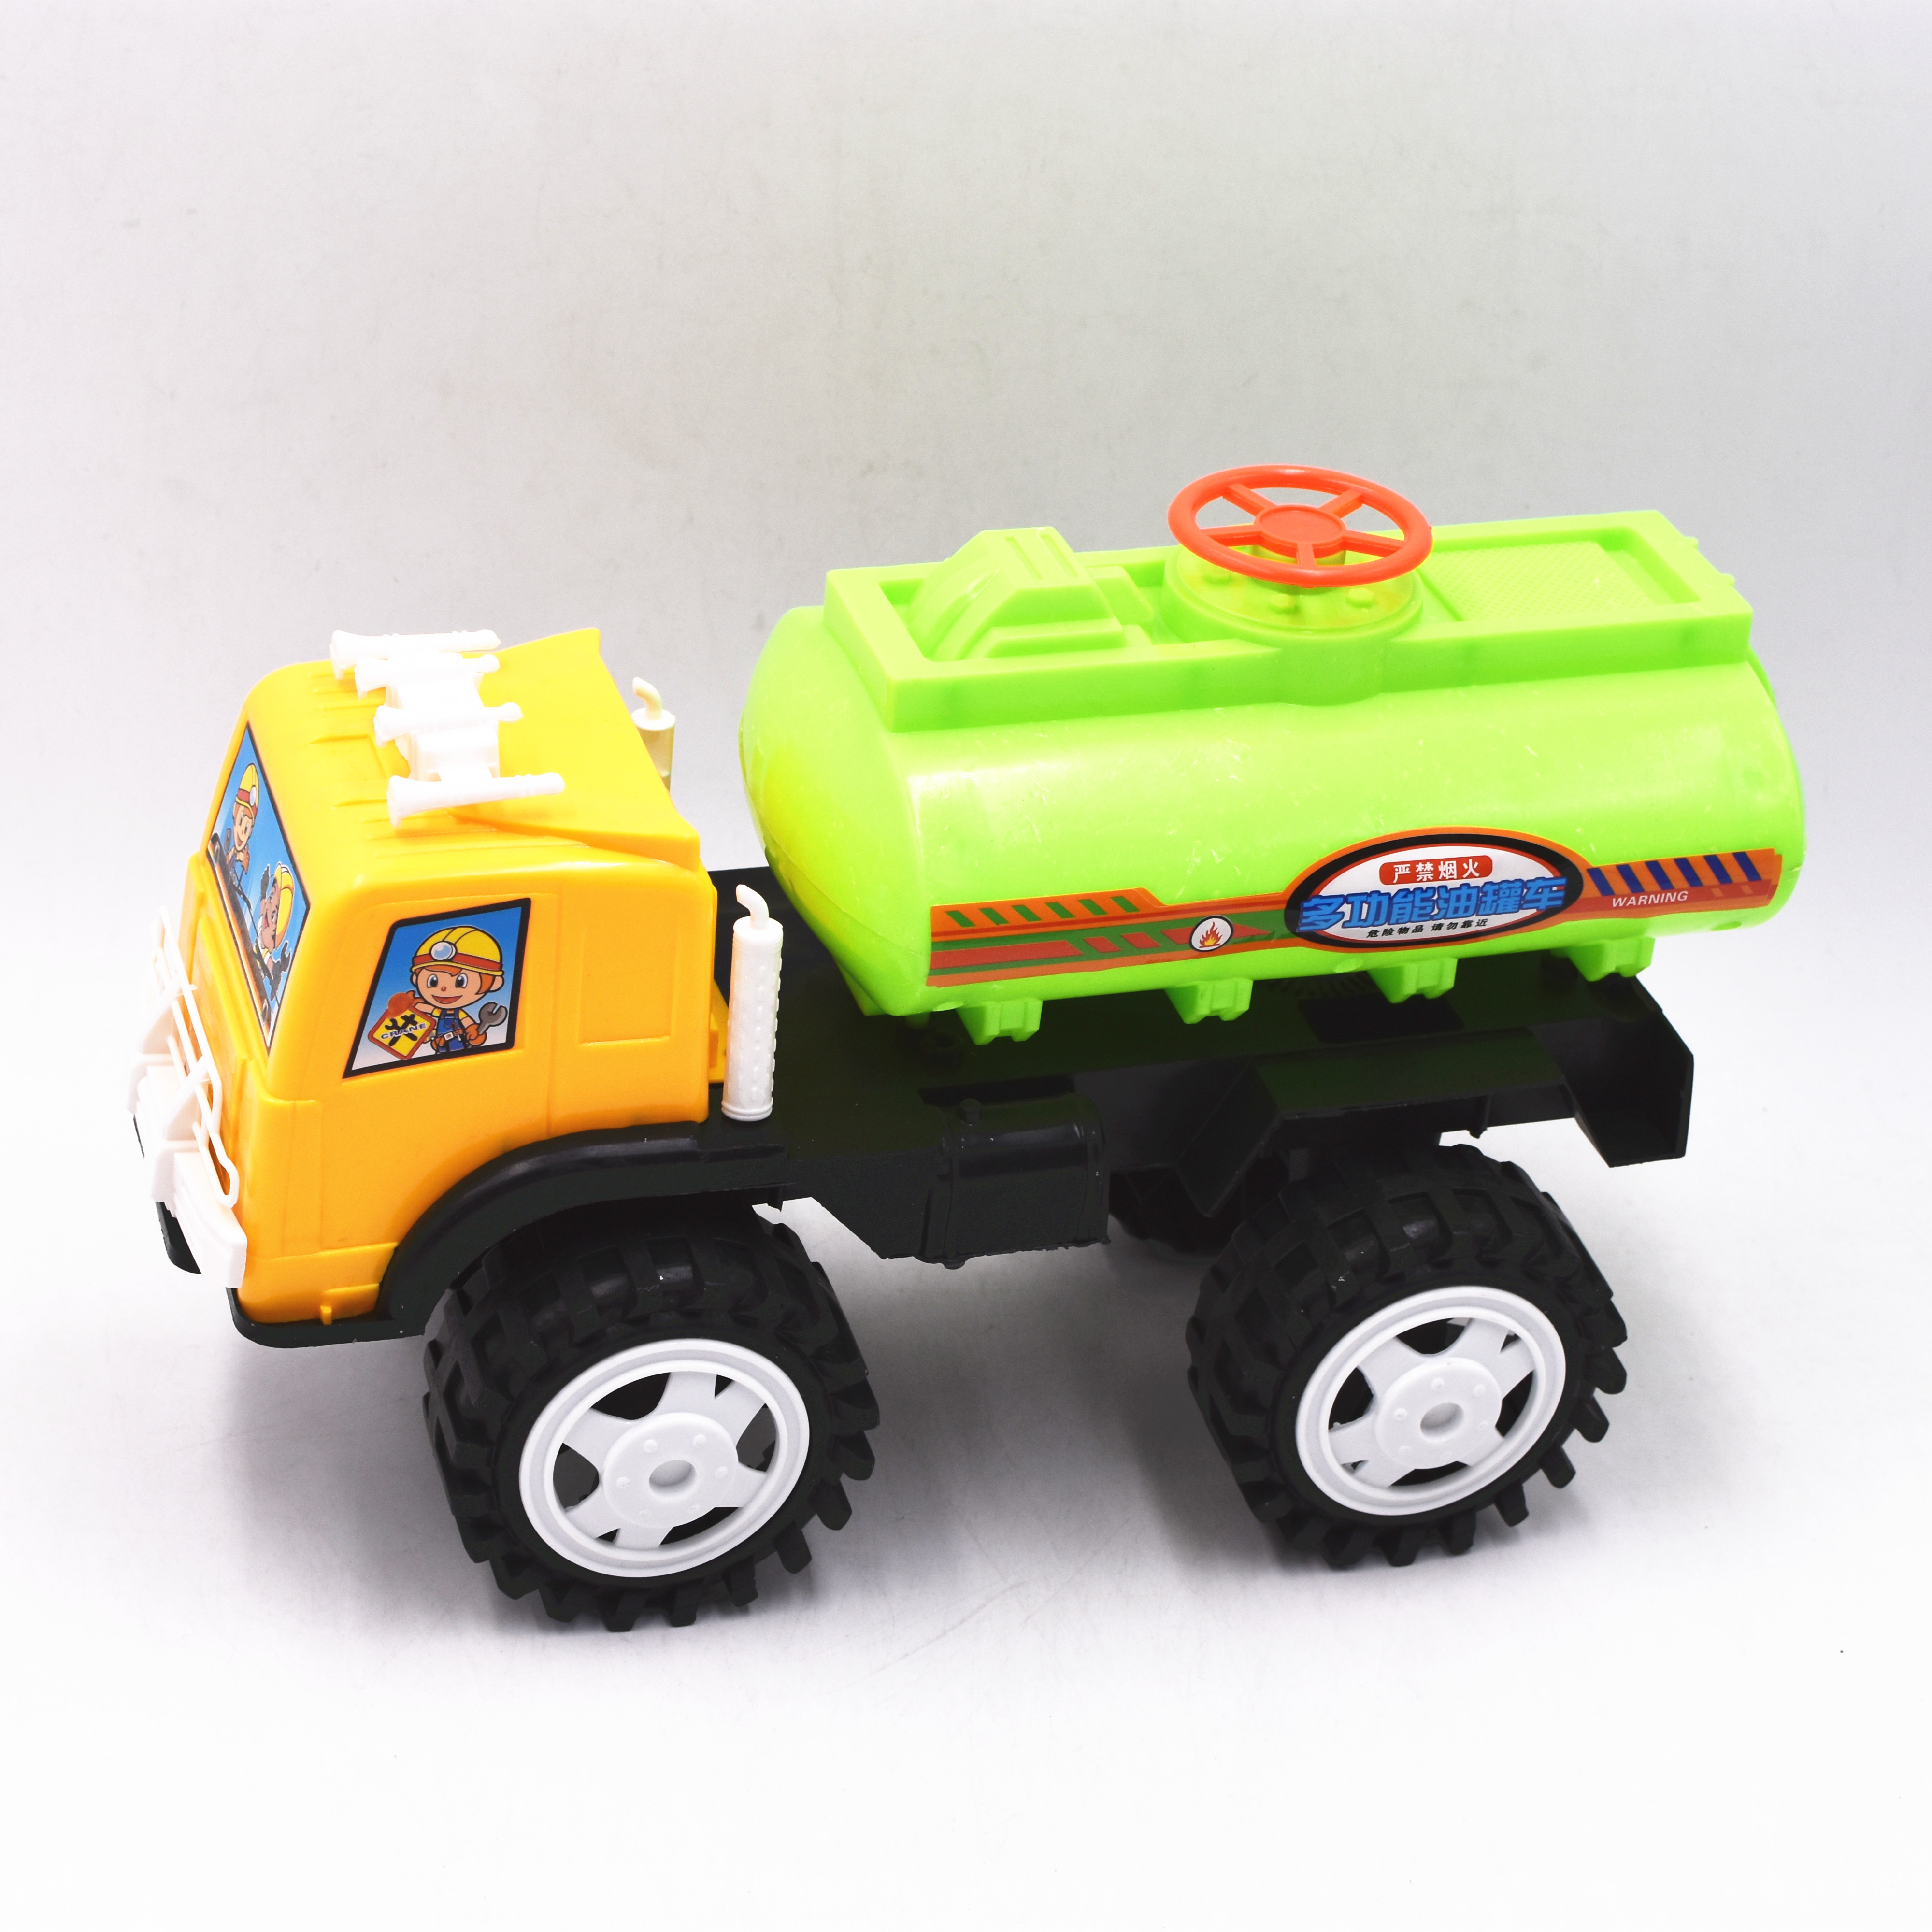 FREE WHEEL TRUCK TOY LY1729